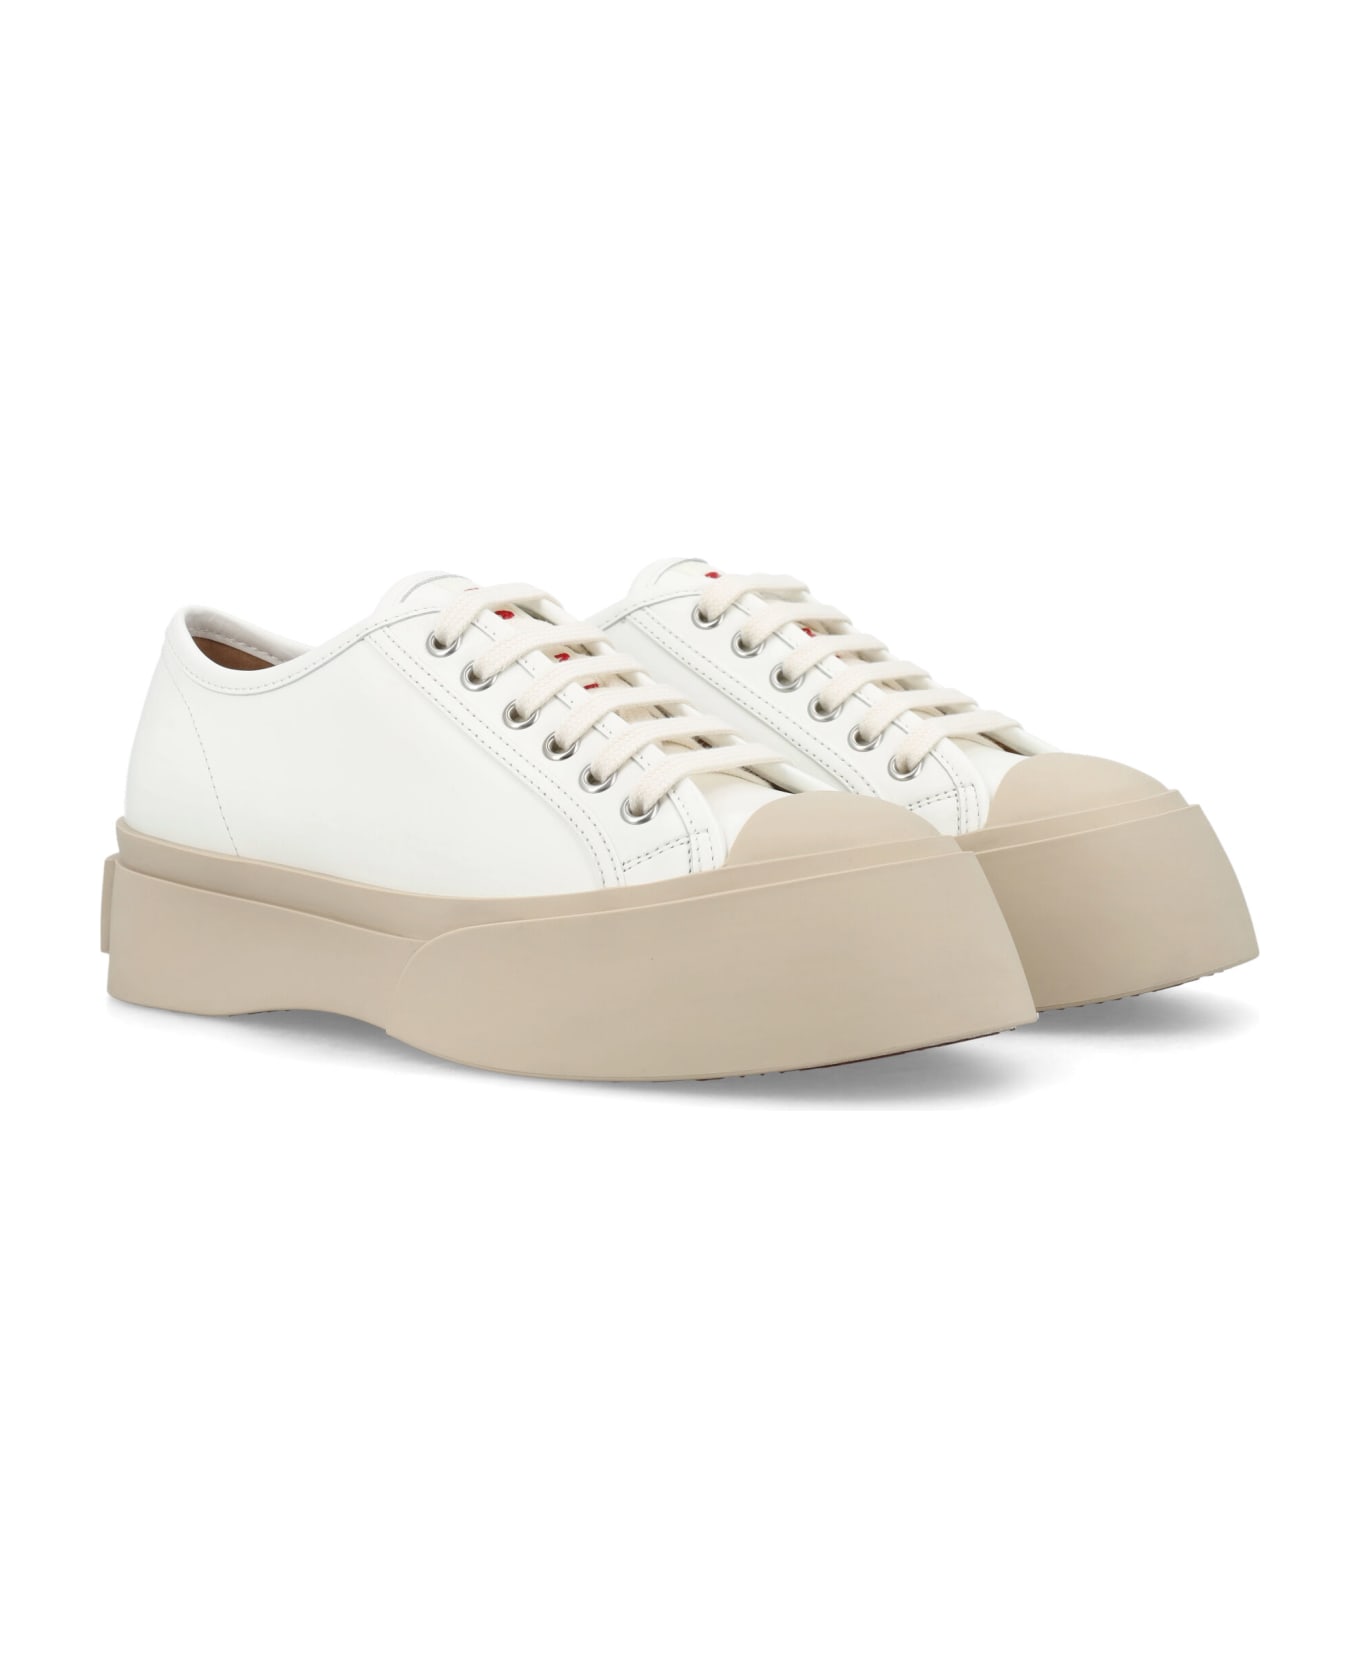 Marni Pablo Lace-up Woman's Sneakers - LILY WHITE ウェッジシューズ